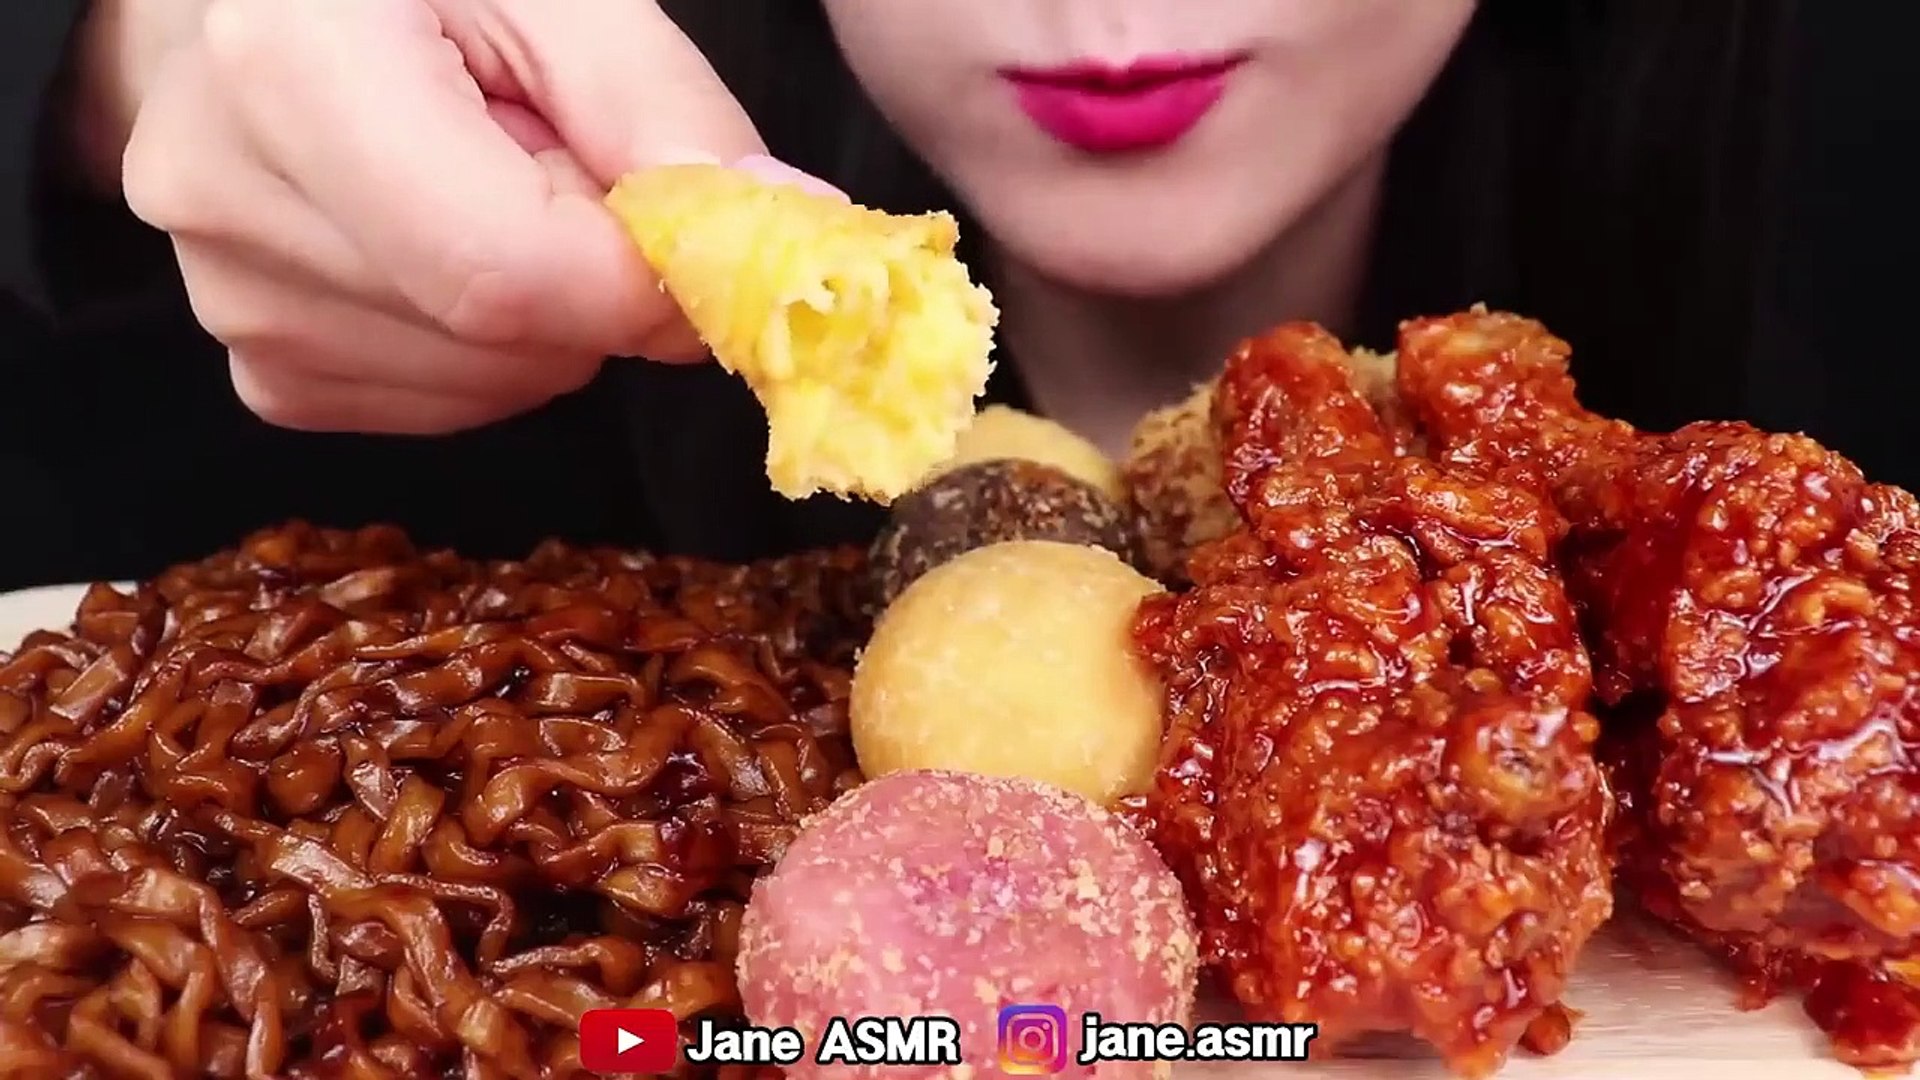 ASMR BLACK BEAN NOODLES, FRIED CHICKEN, CHEESE BALLS, EATING SOUNDS - video  Dailymotion